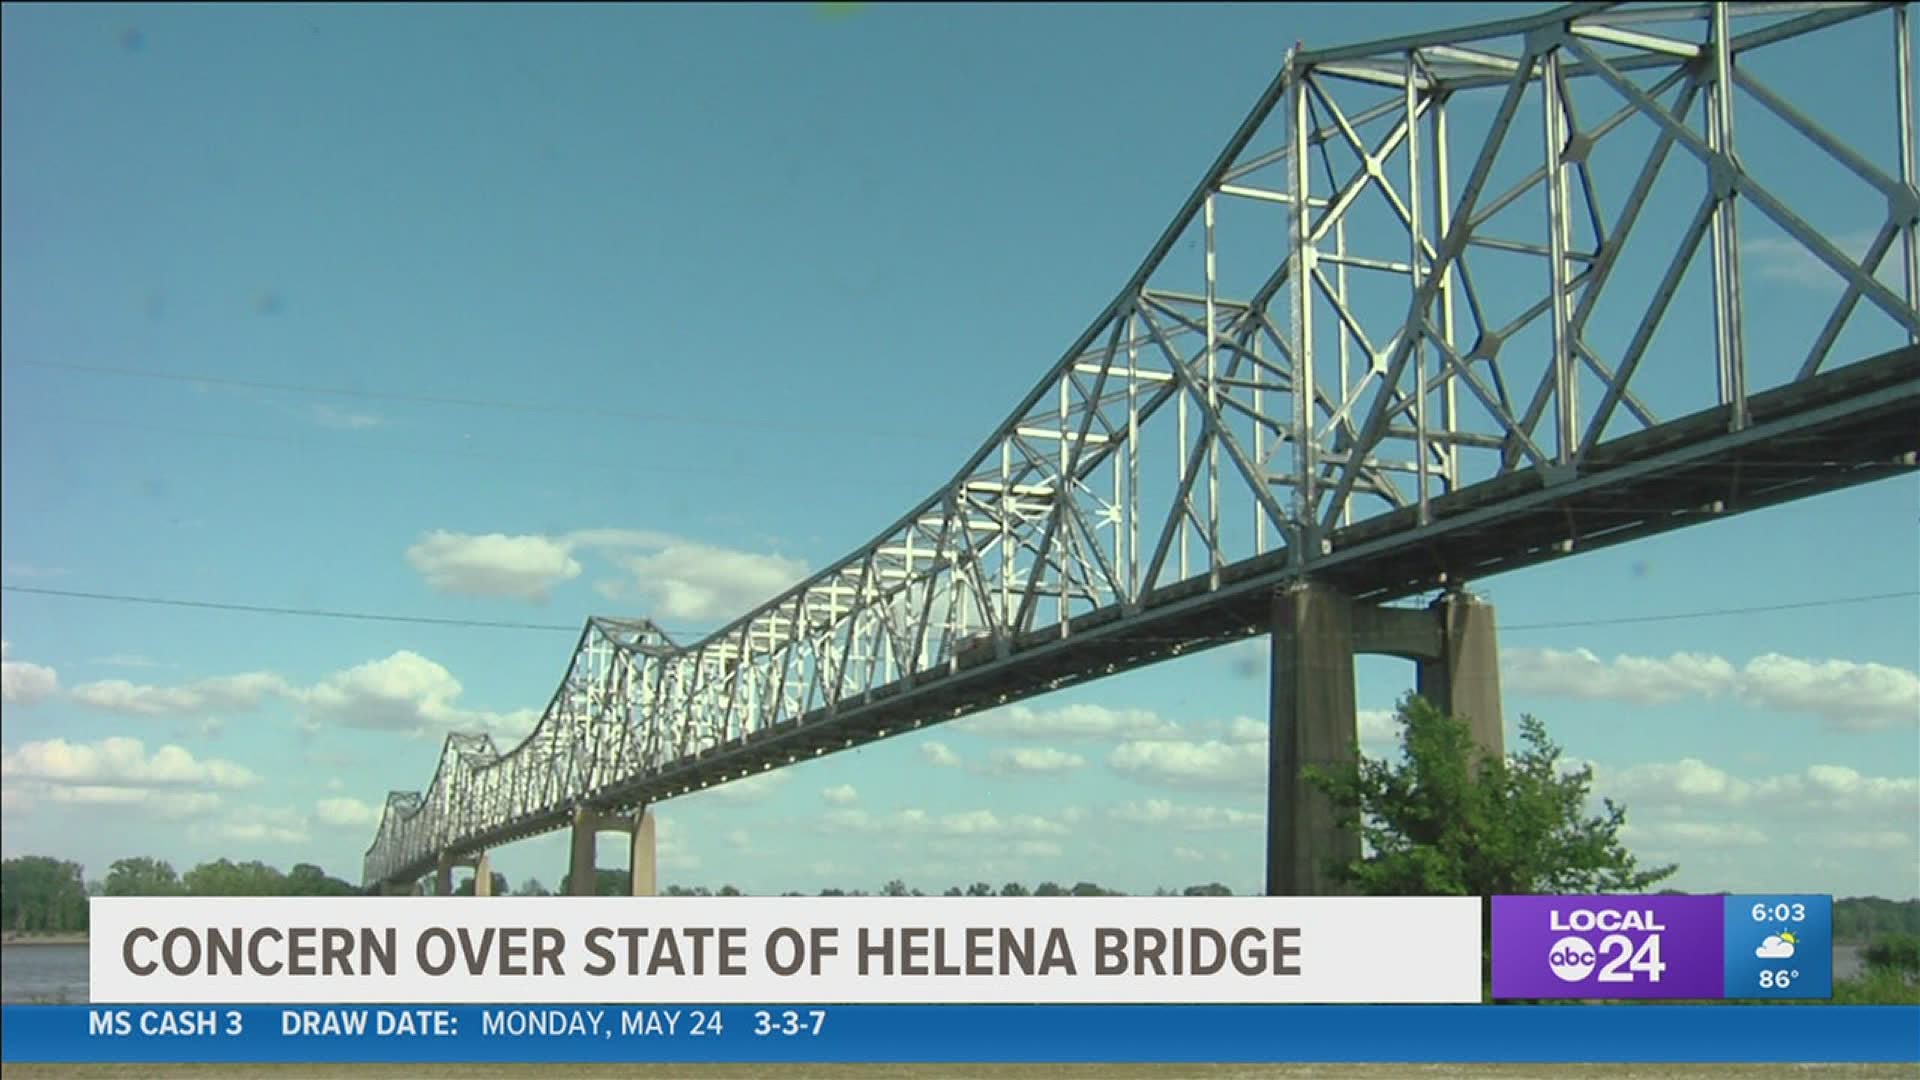 Helena-West Helena Mayor Kevin Smith says the bridge is safe and will be reinspected in mid-June.